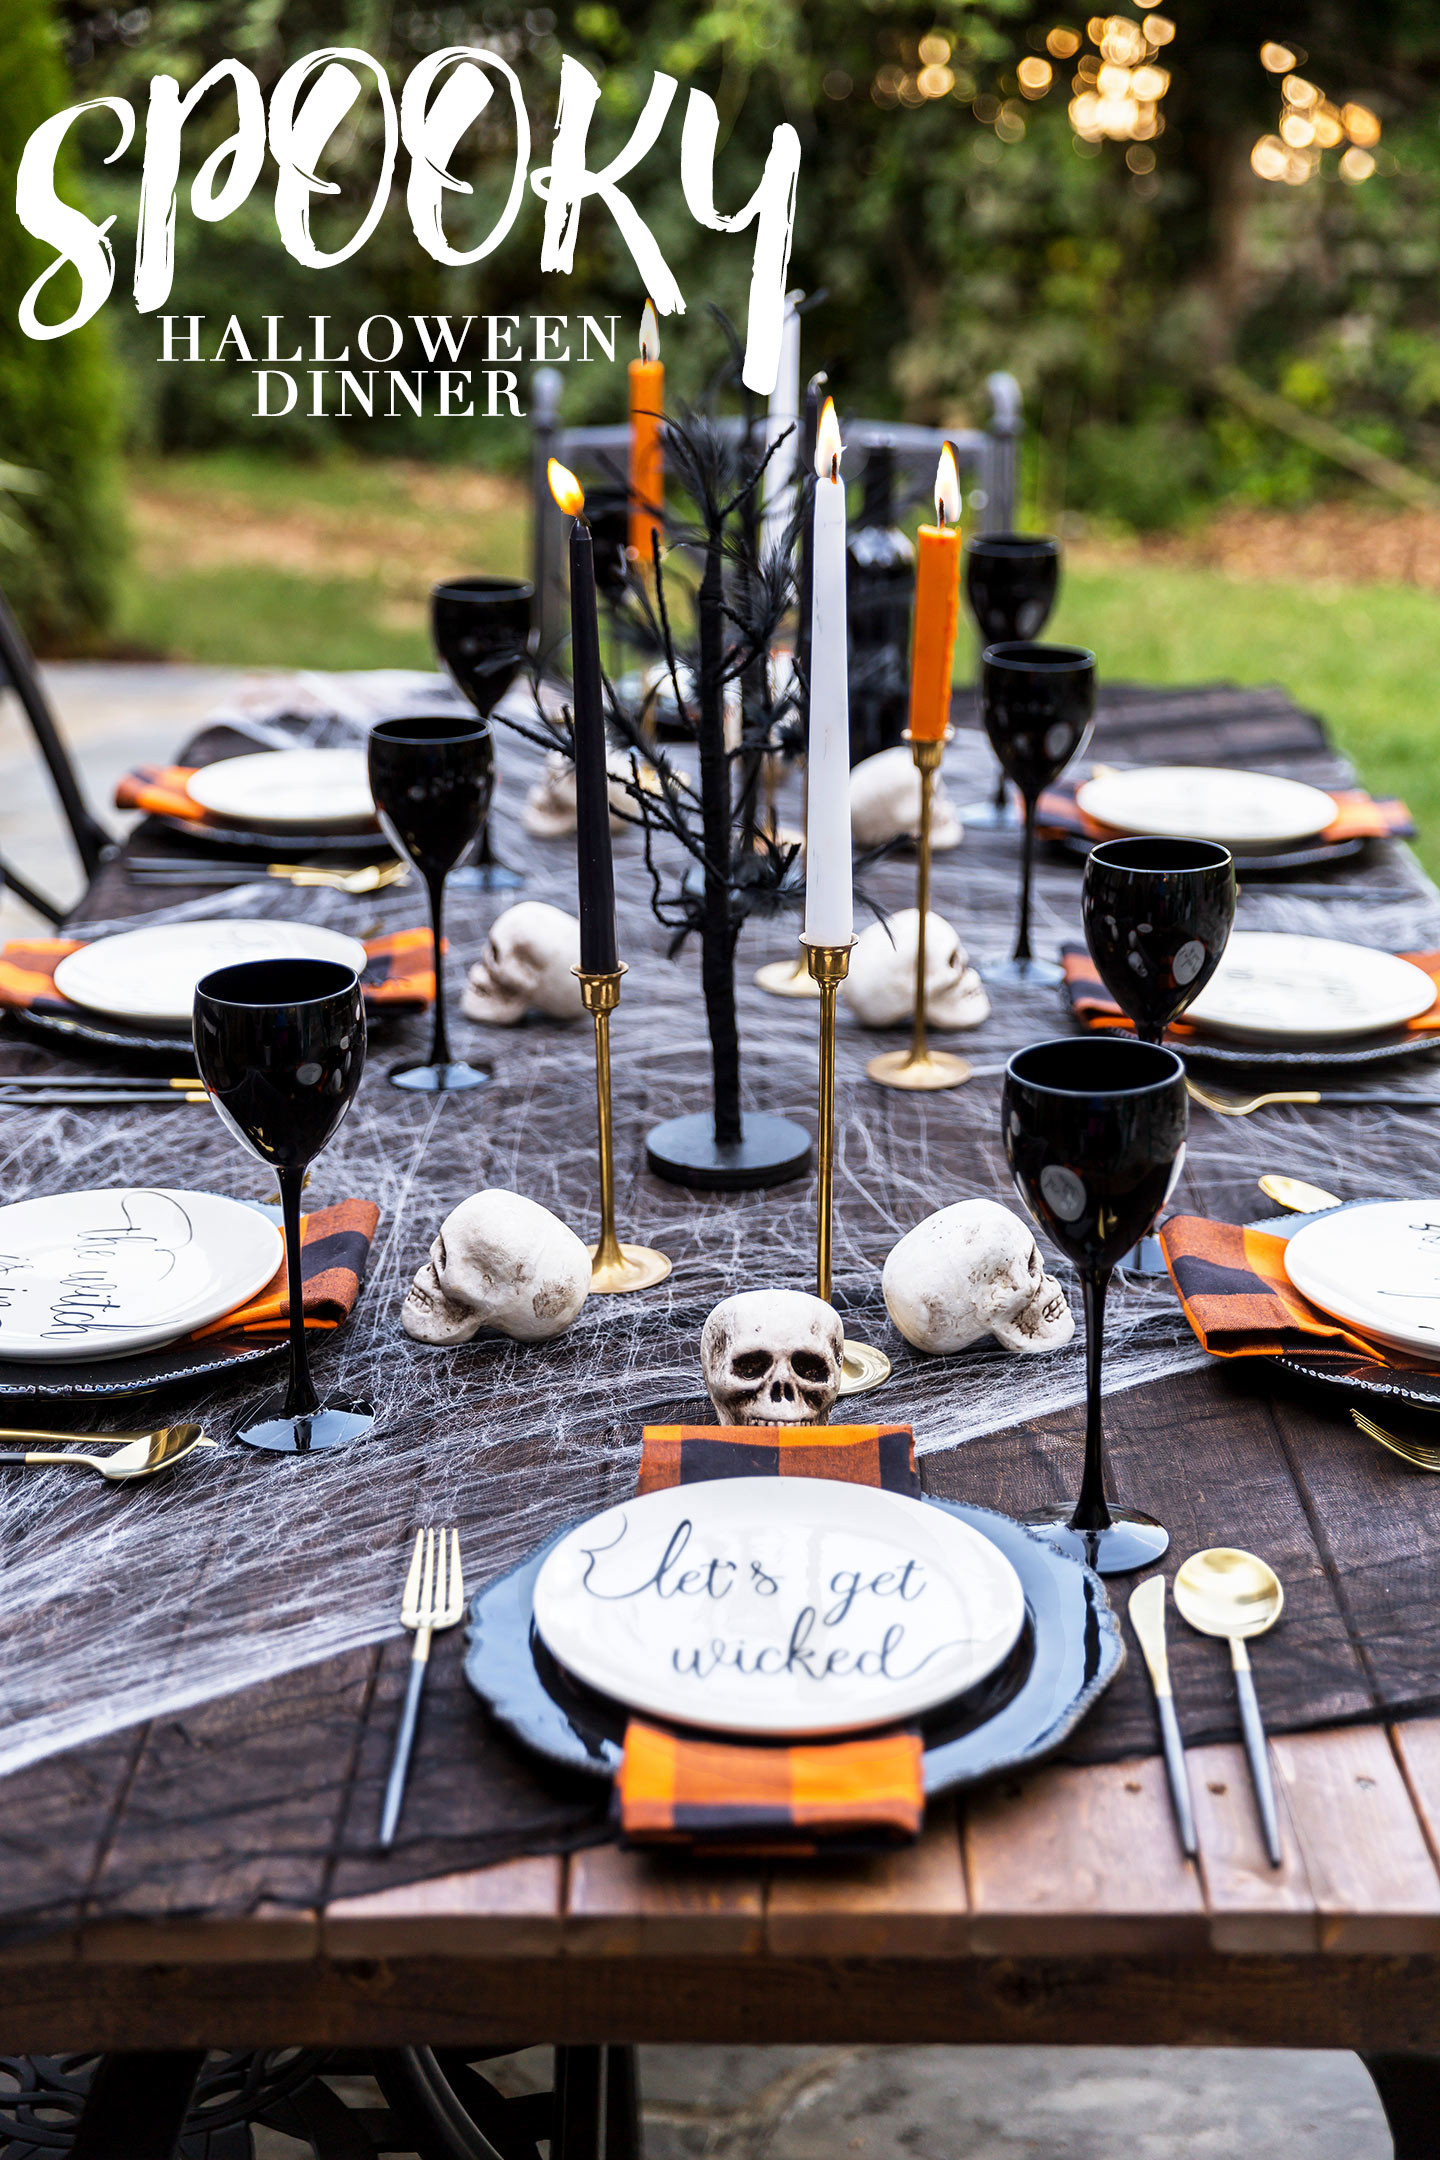 Halloween Theme Party Ideas For Adults
 Adult Halloween Party Decorations & Halloween Menu Ideas